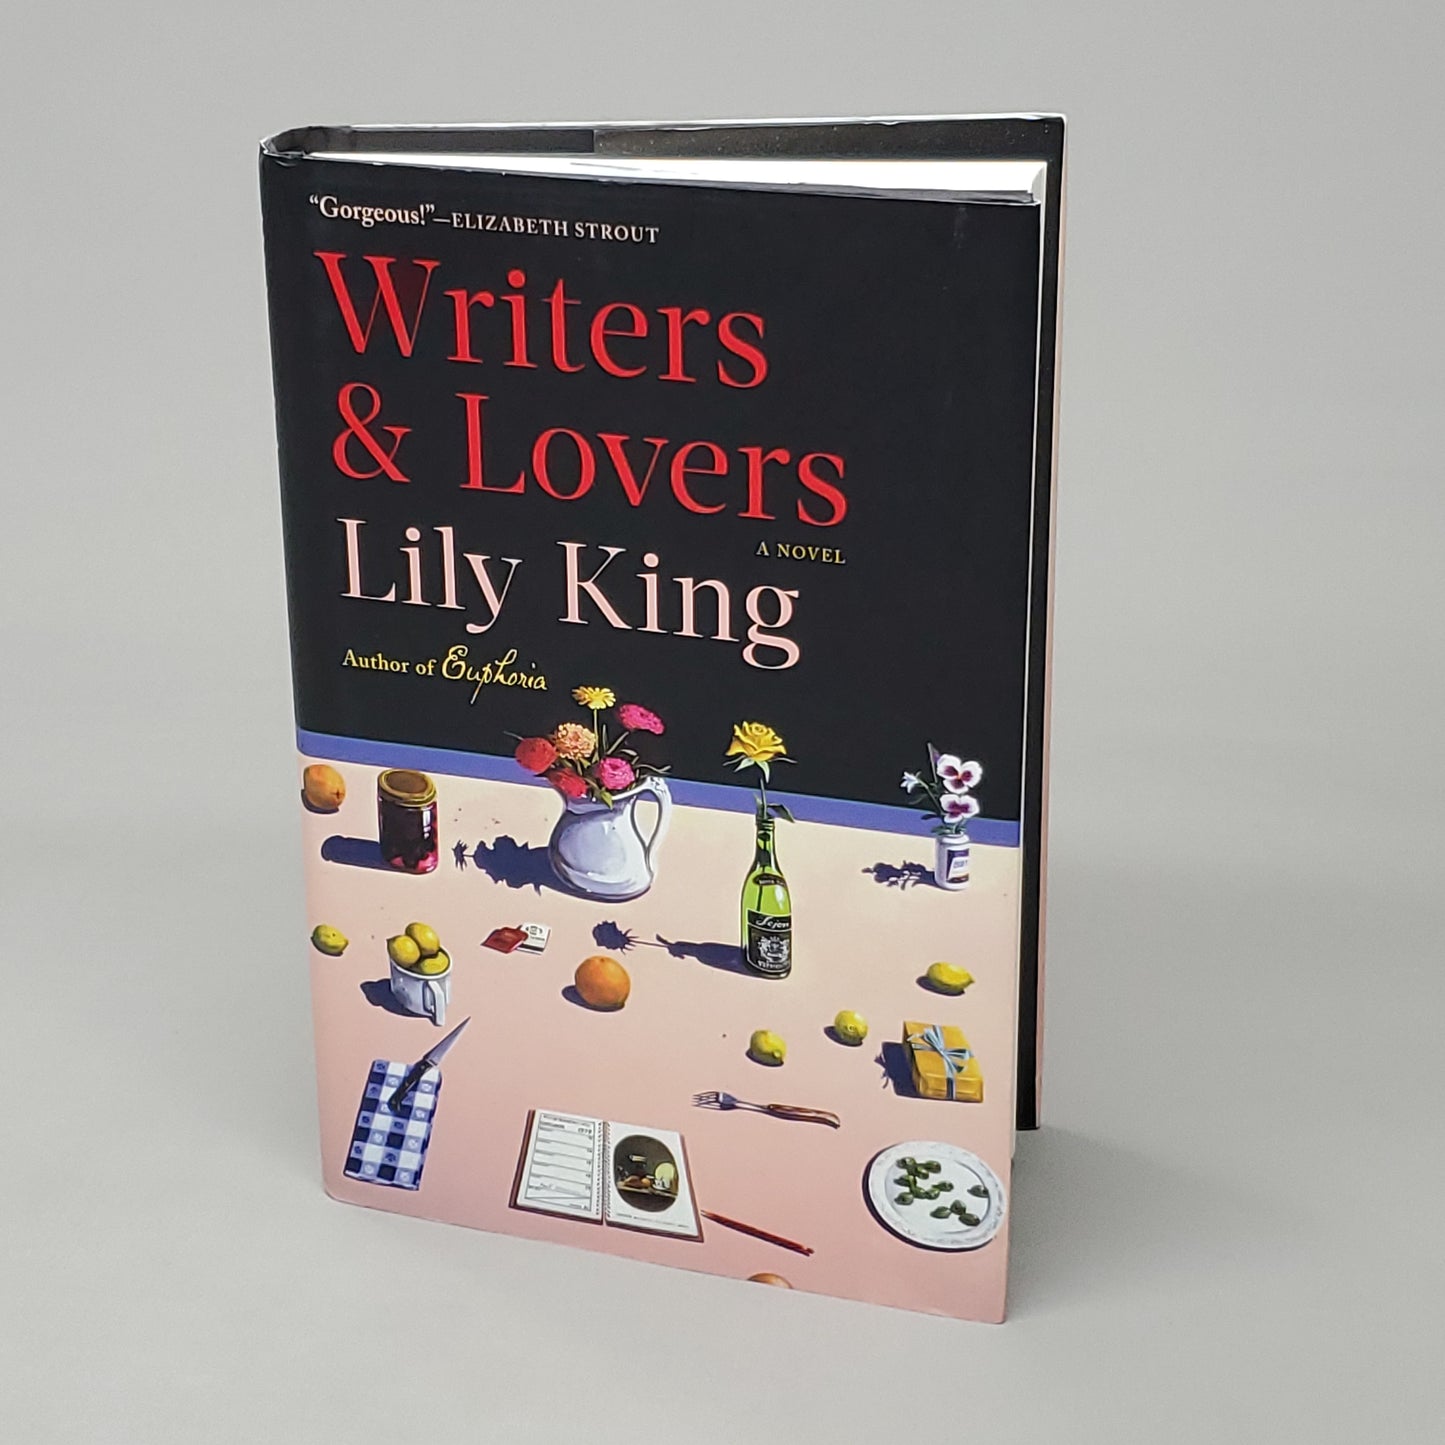 WRITERS & LOVERS by Lily King Book Hardback (New)